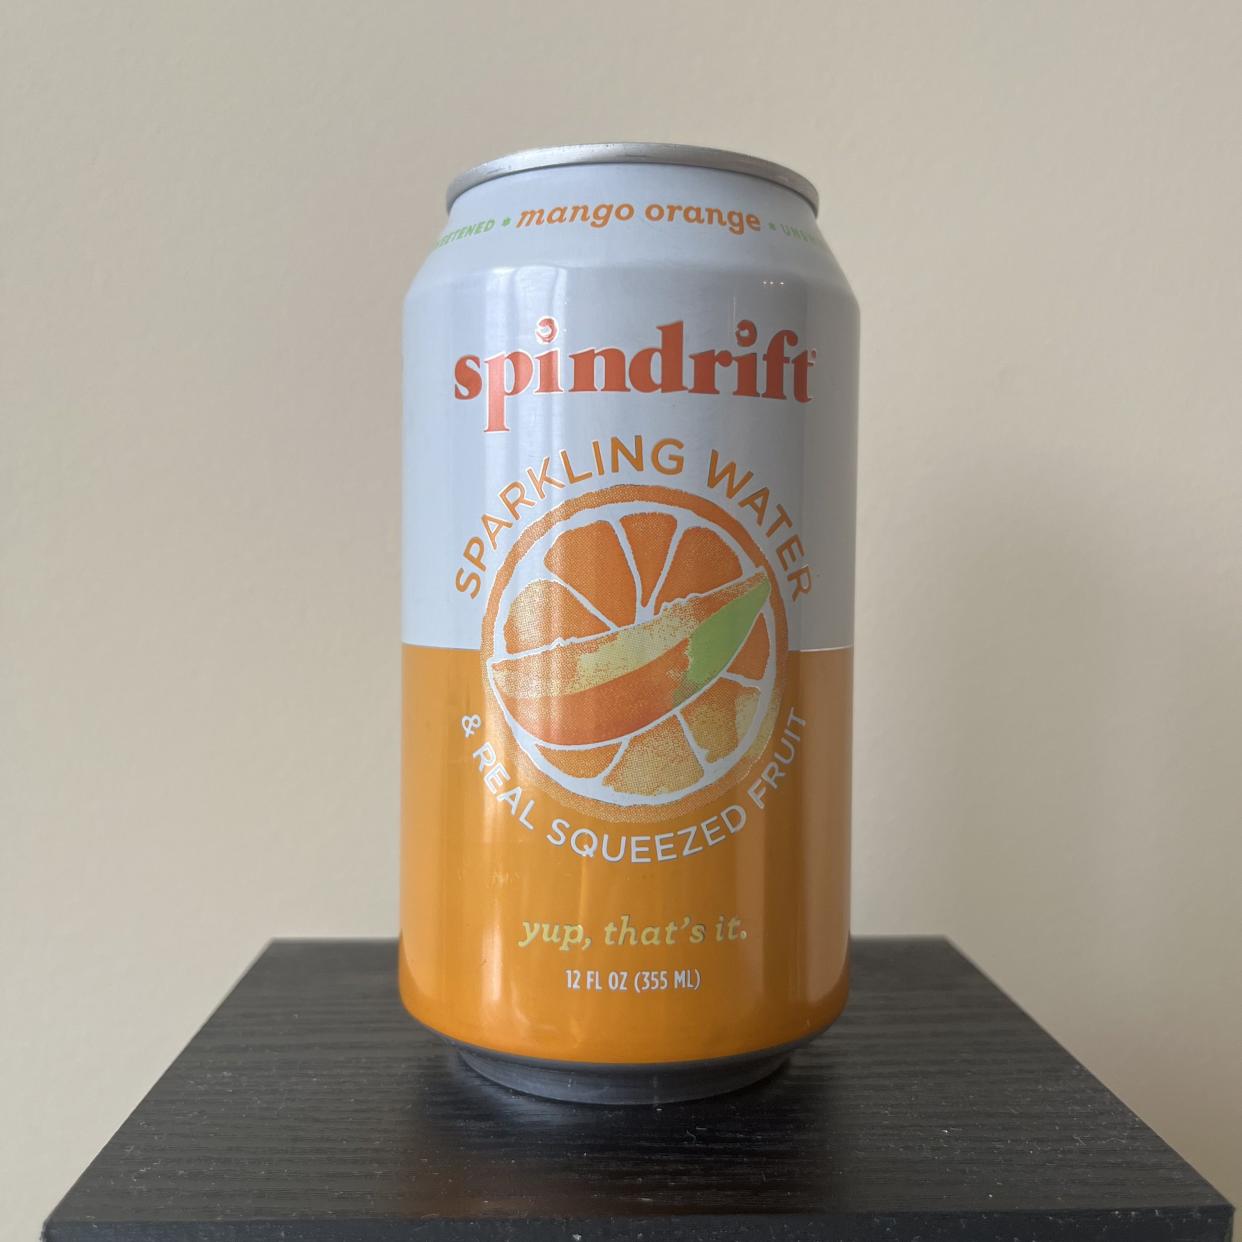 a can of spindrift mango orange